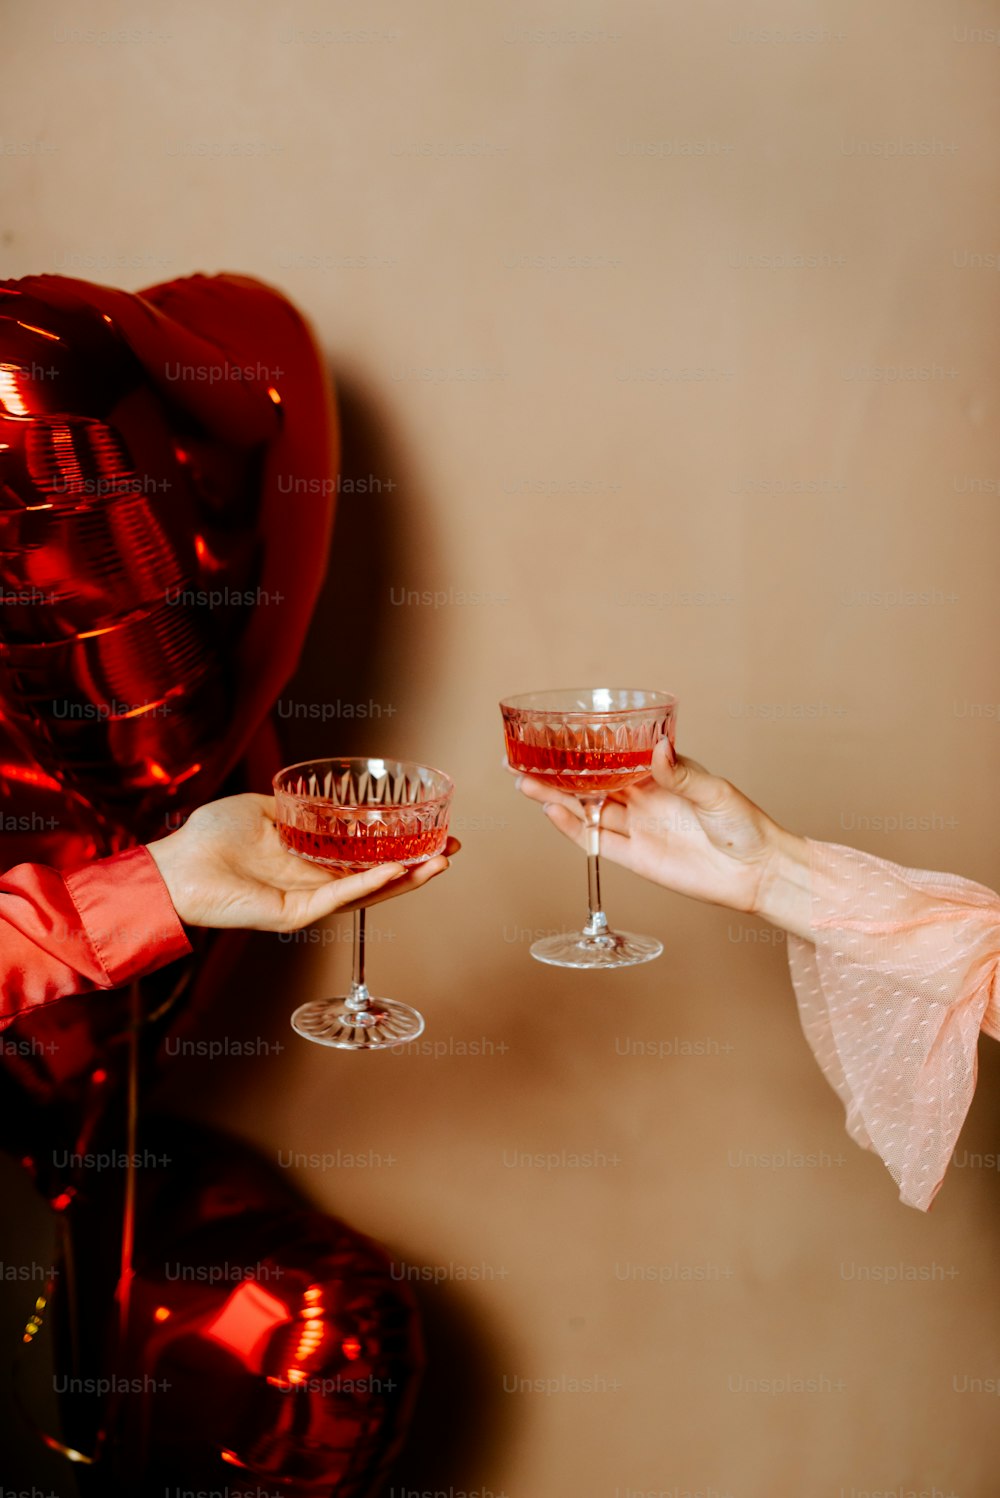 a person holding a wine glass in front of a balloon